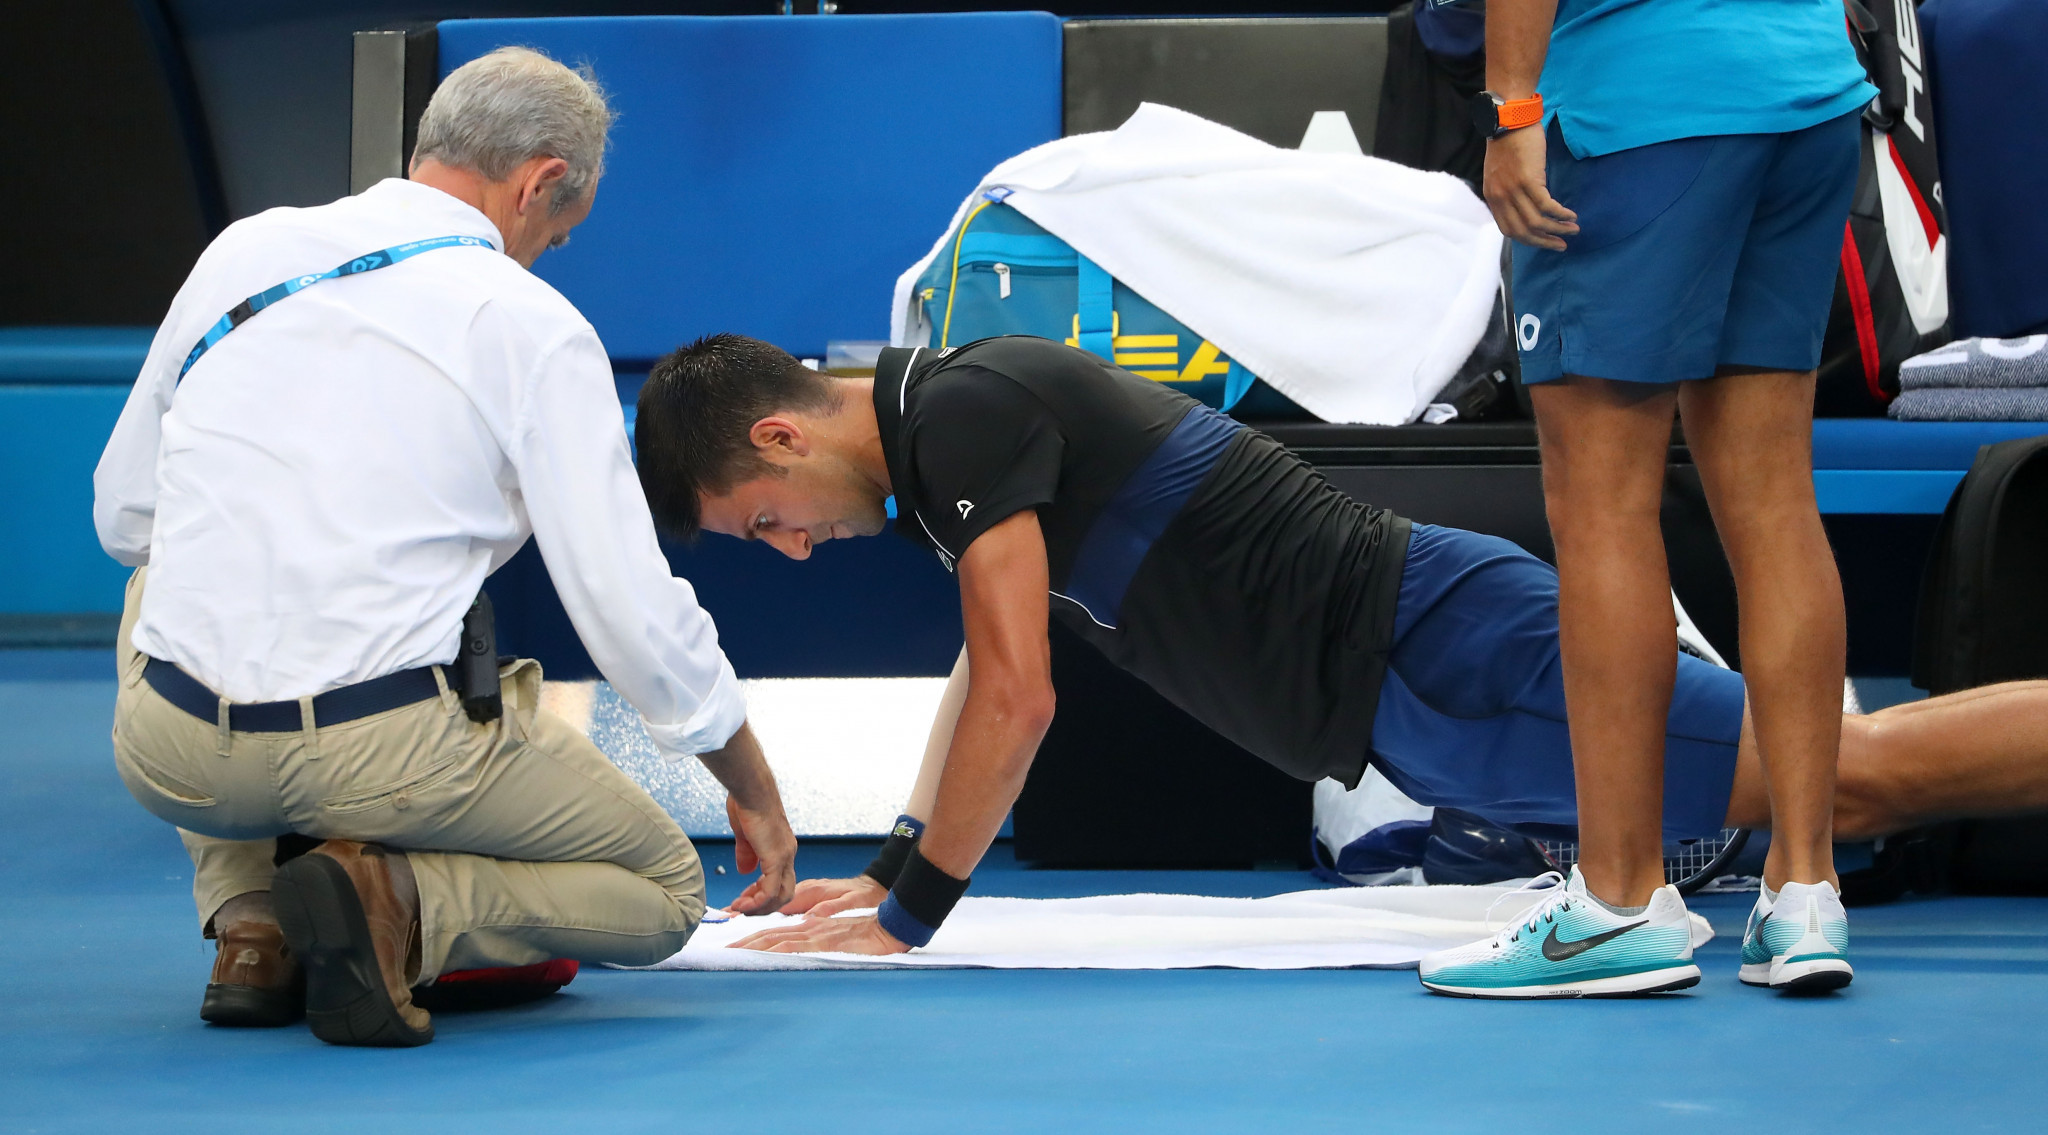 Serbia's Novak Djokovic received treatment during his third round match today ©Getty Images